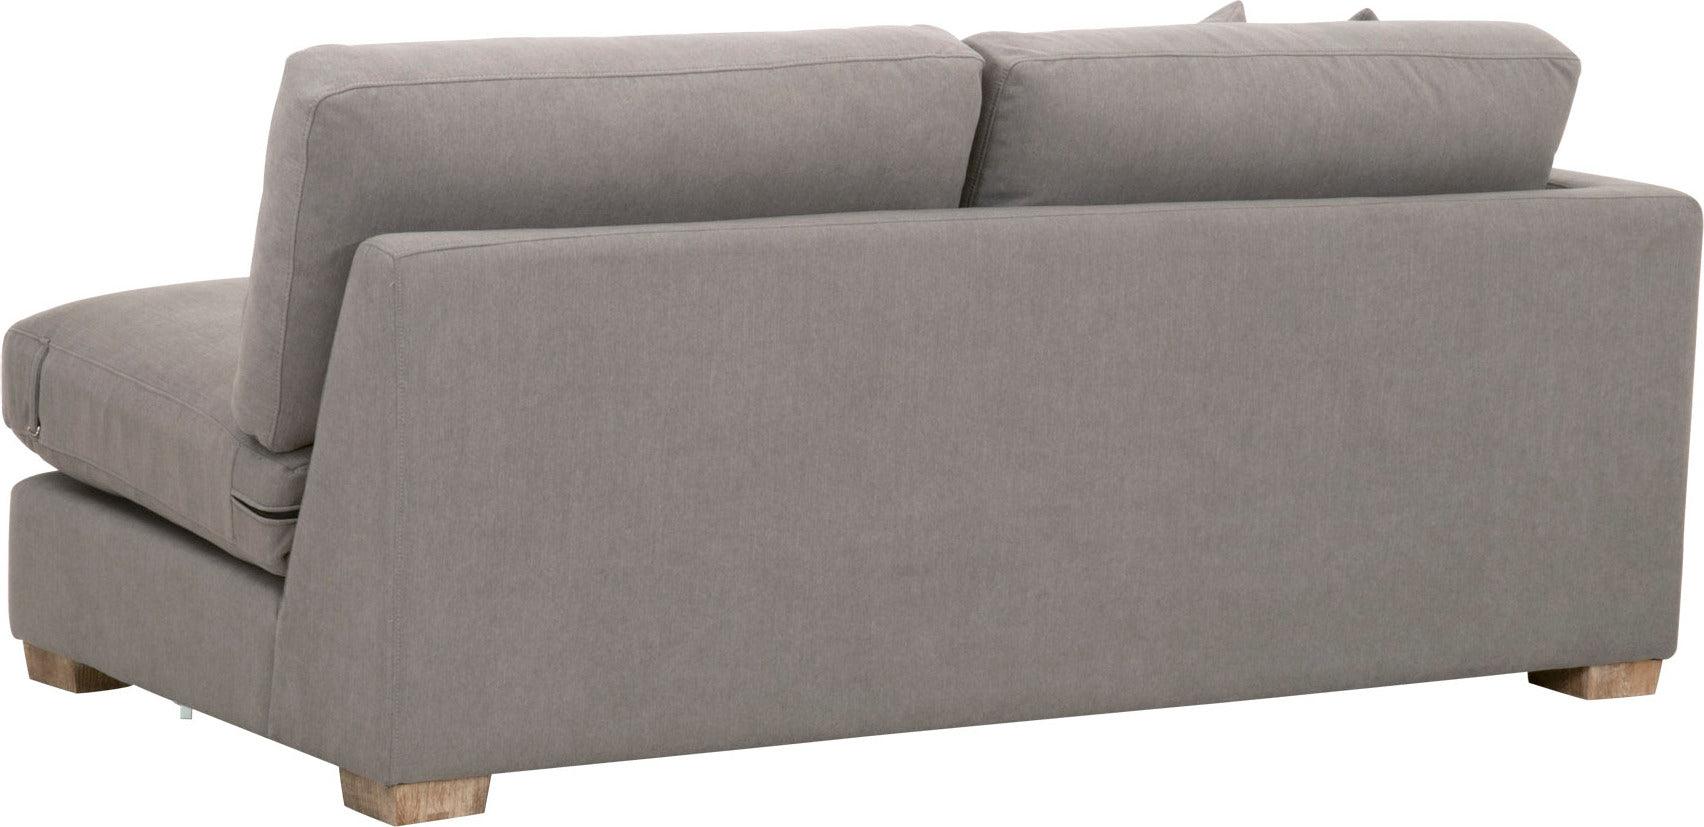 Essentials For Living Sofas & Couches - Hayden Modular Taper 2-Seat Left Arm Sofa Natural Gray Oak